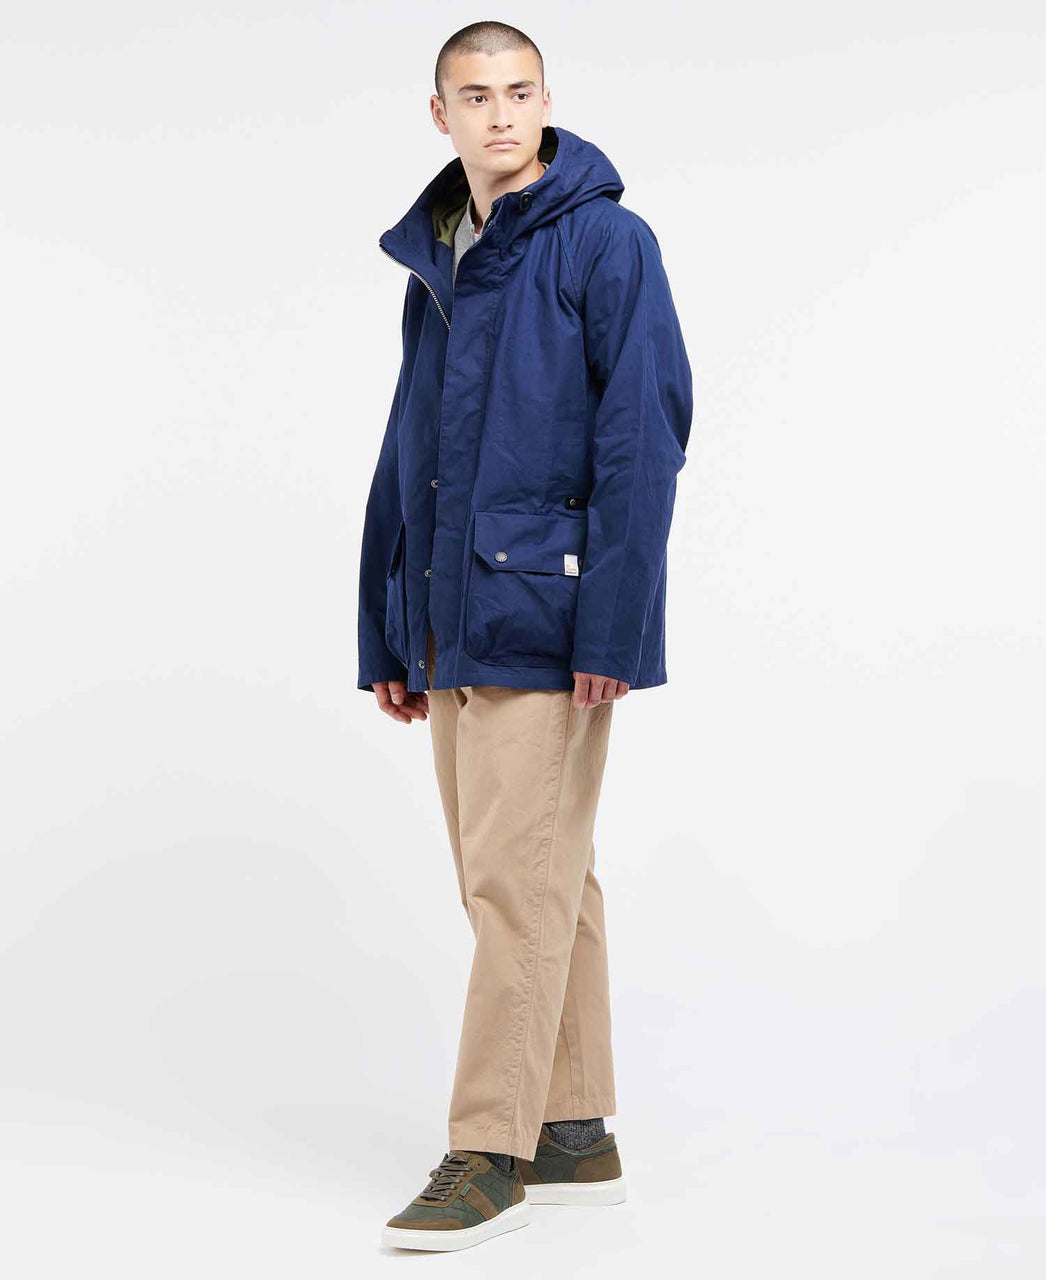 Ally Capellino x Barbour Ernest Waxed Cotton Jacket in Navy